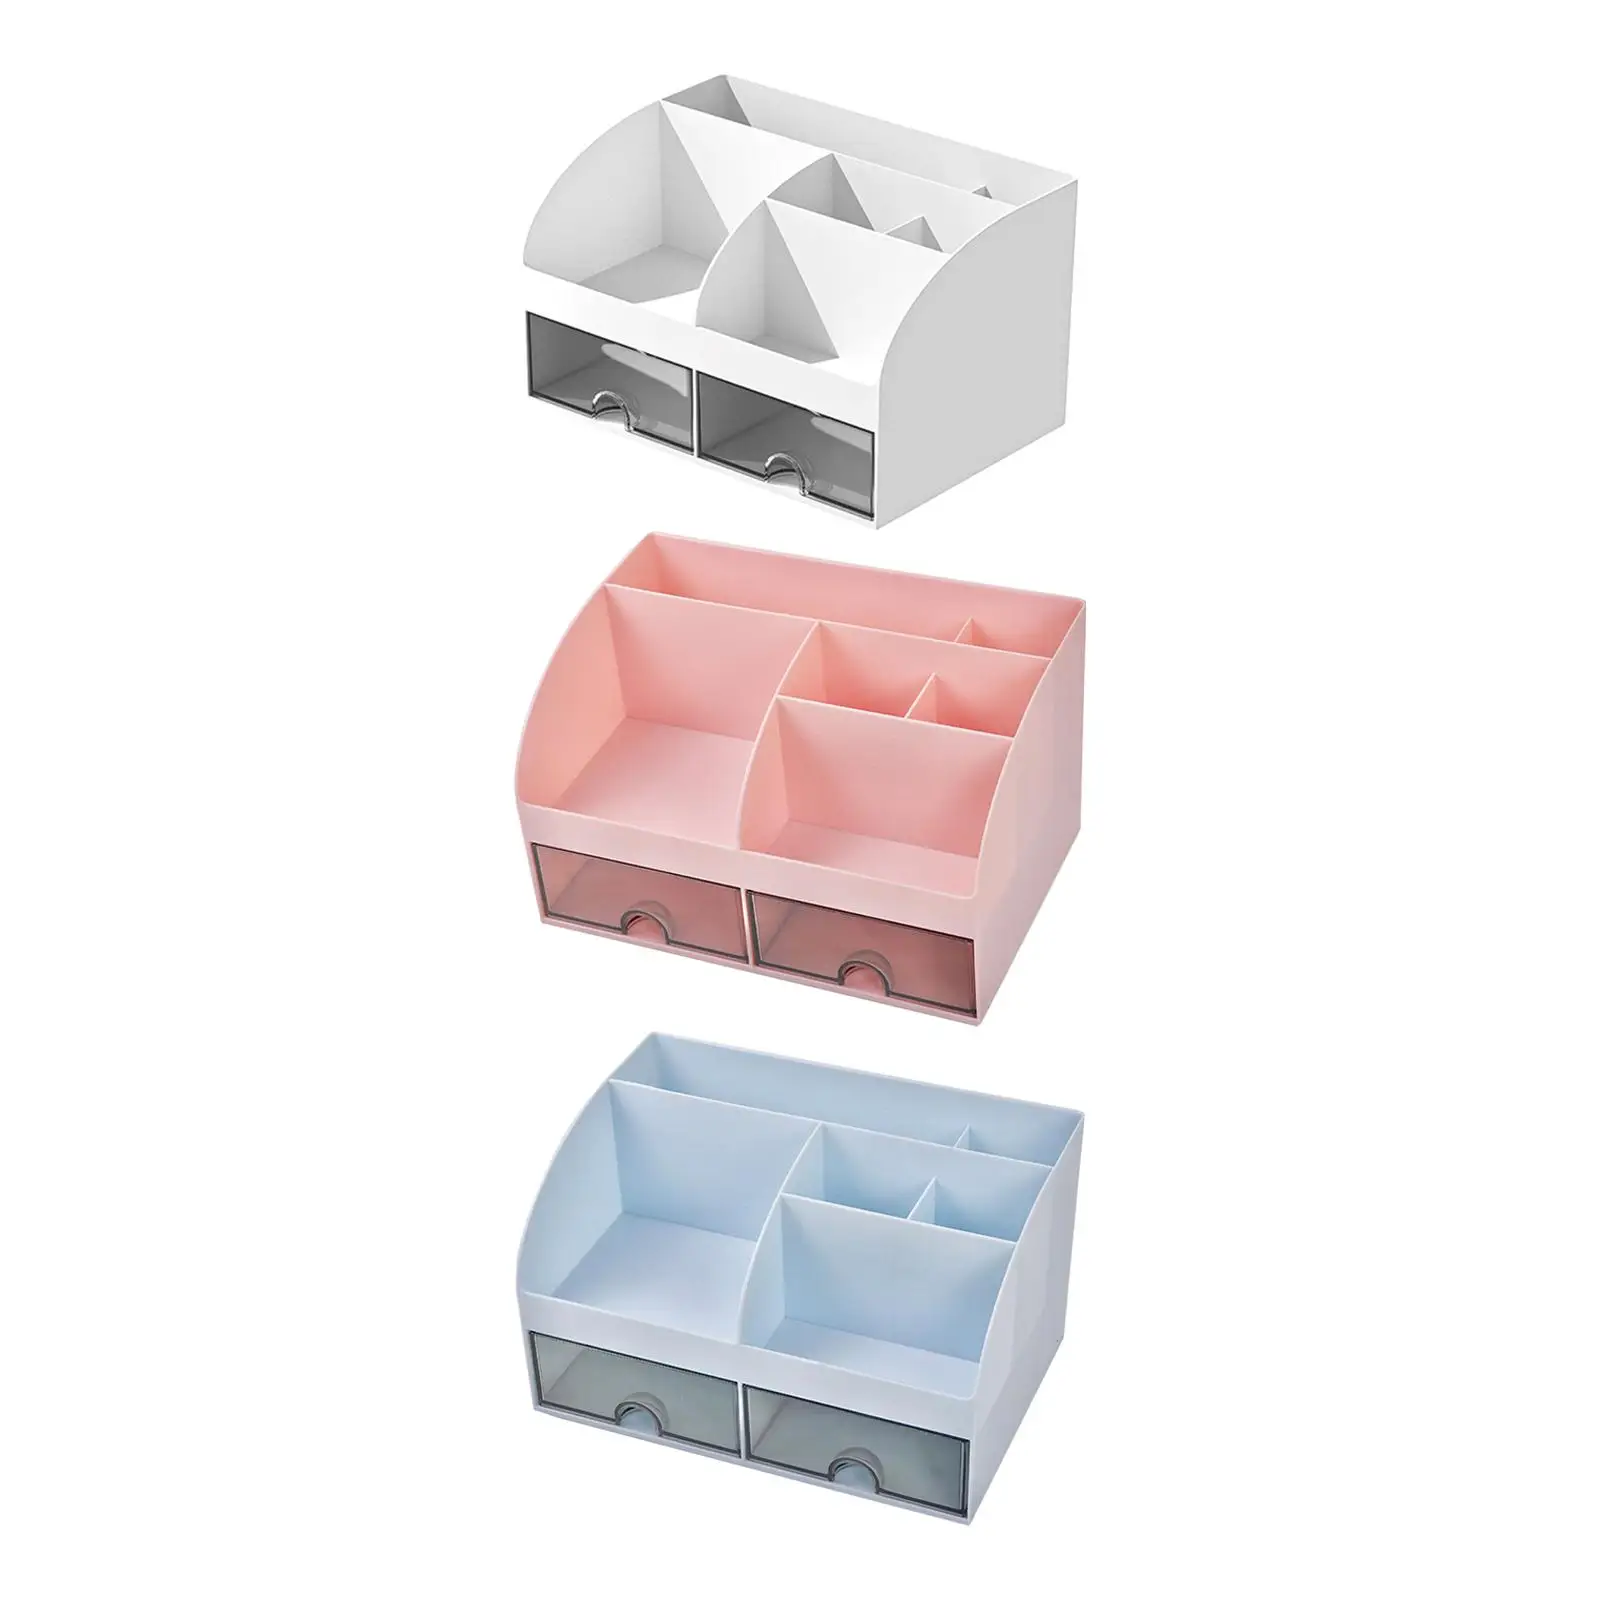 Desk Organizer with Drawers Office Supplies Multifunction Desktop Storage Drawers for Office Counter Dresser Bathroom Table